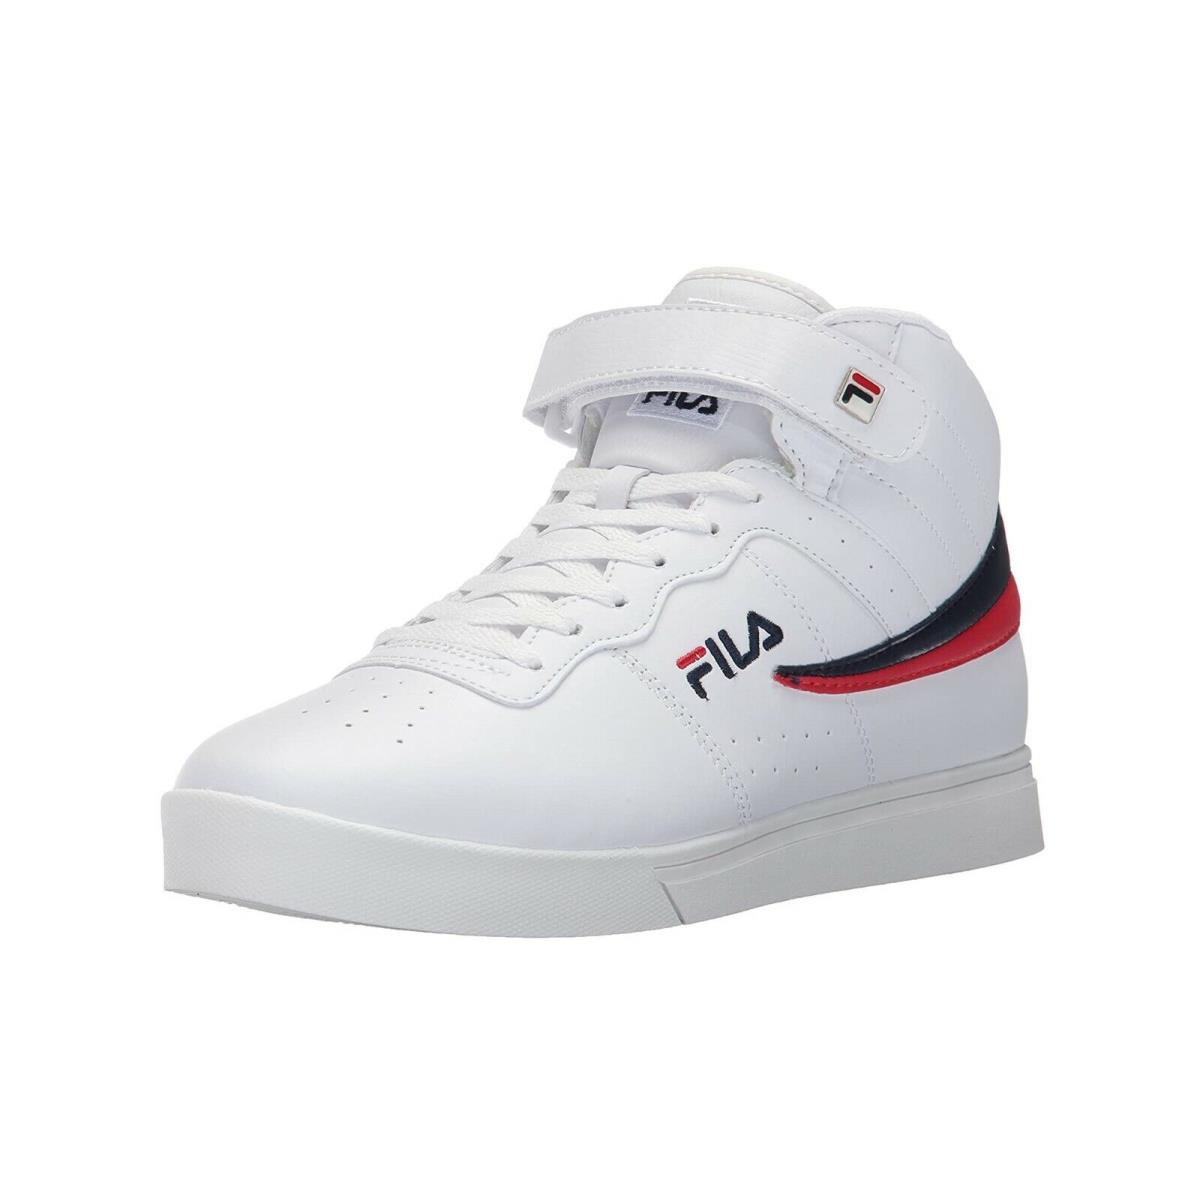 Fila Vulc 13 Men Shoes Sneakers Faux Leather White Navy Red High Top